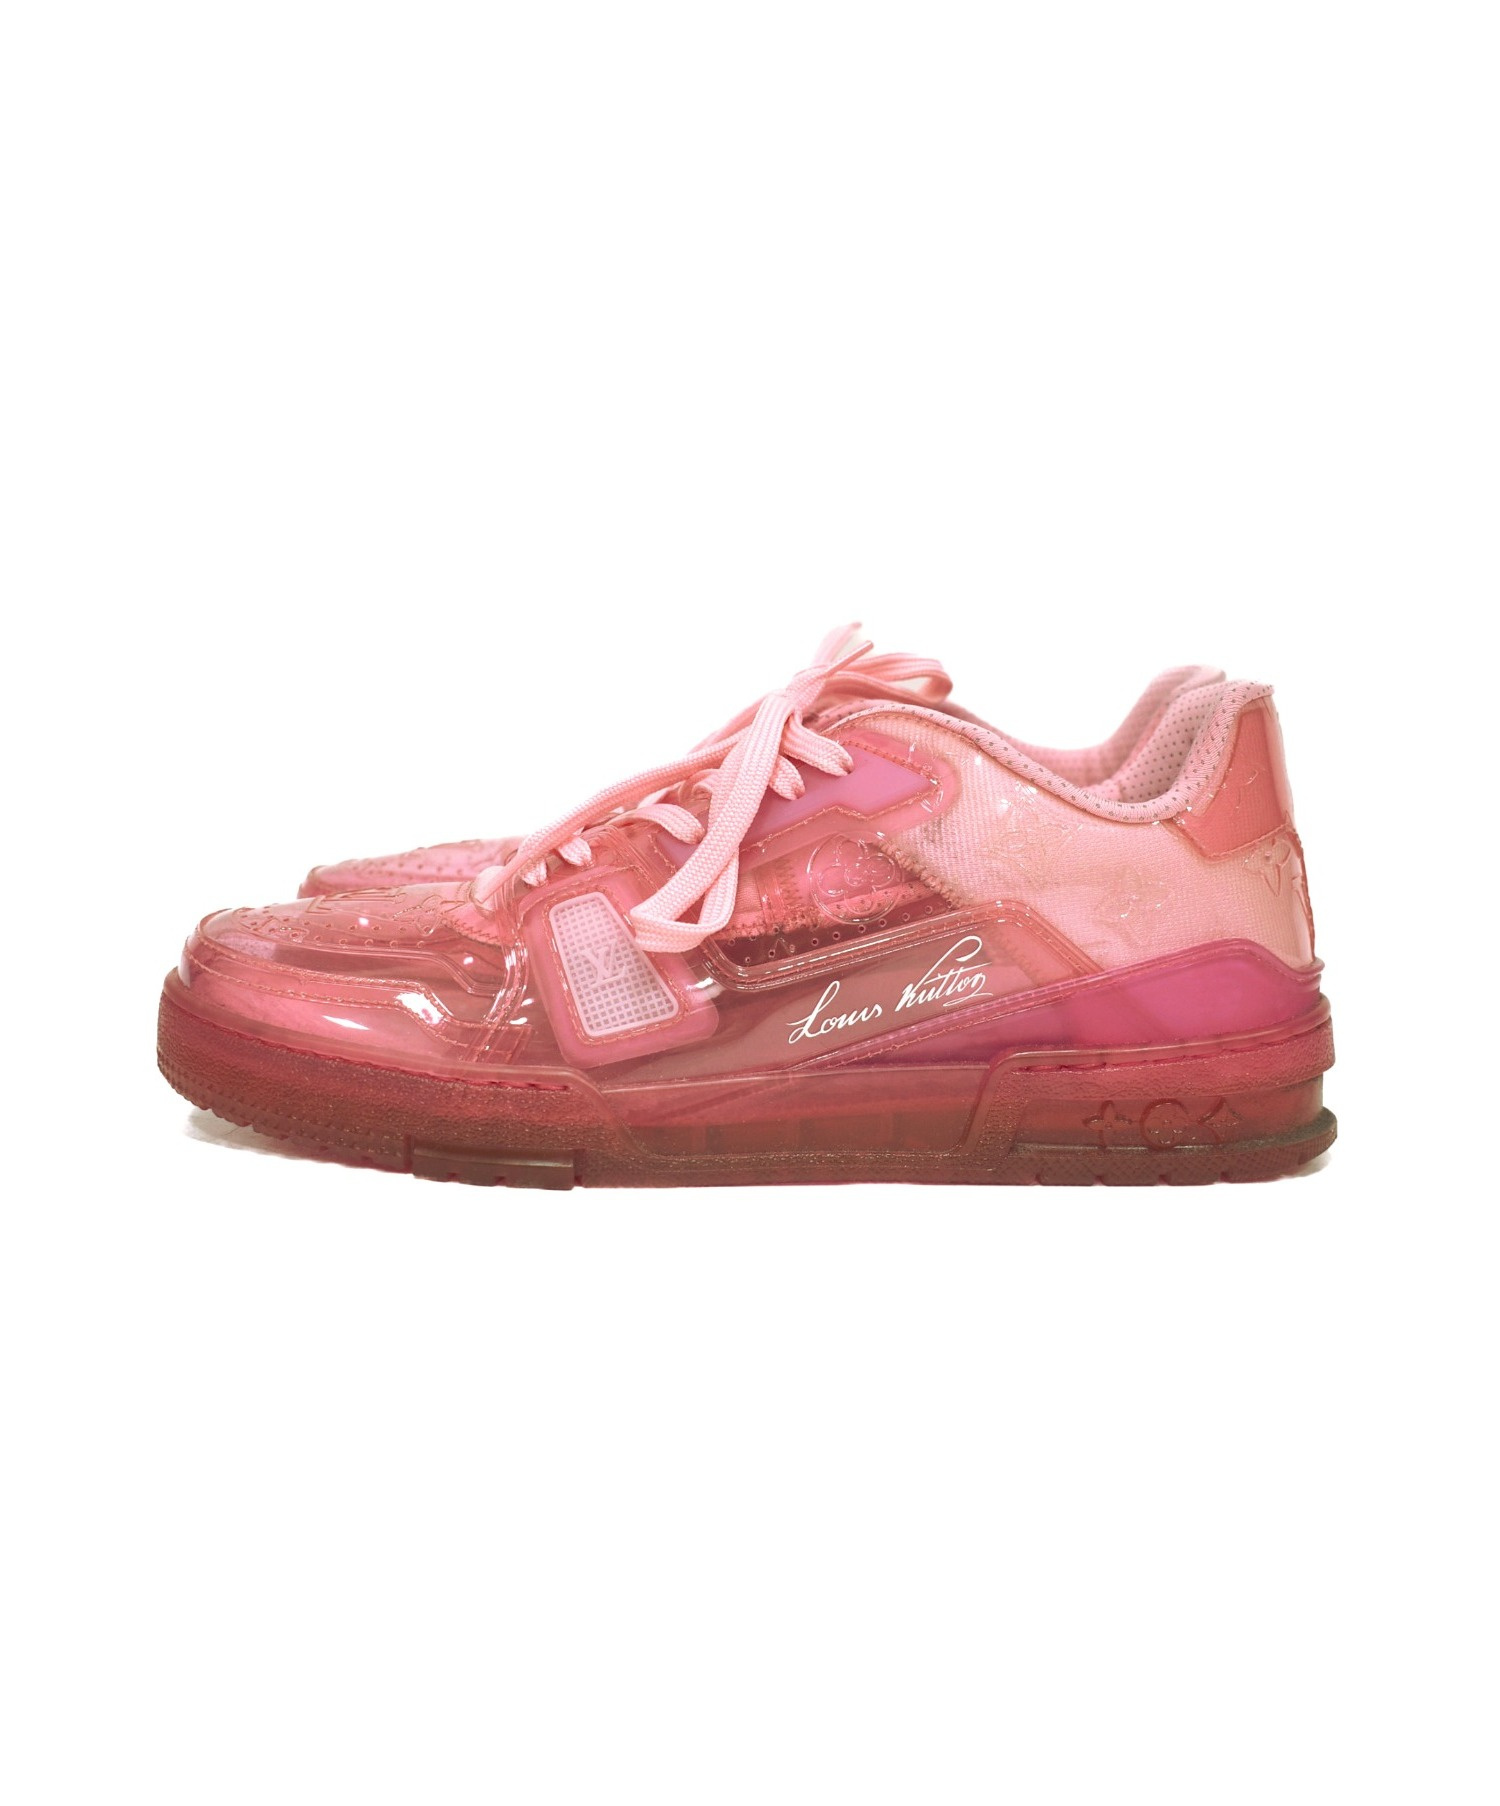 LOUIS VUITTON (ルイヴィトン) トレイナーラインスニーカー ピンク サイズ:7 1/2 GO 1210 1A5YQV Trainer  Line Sneakers